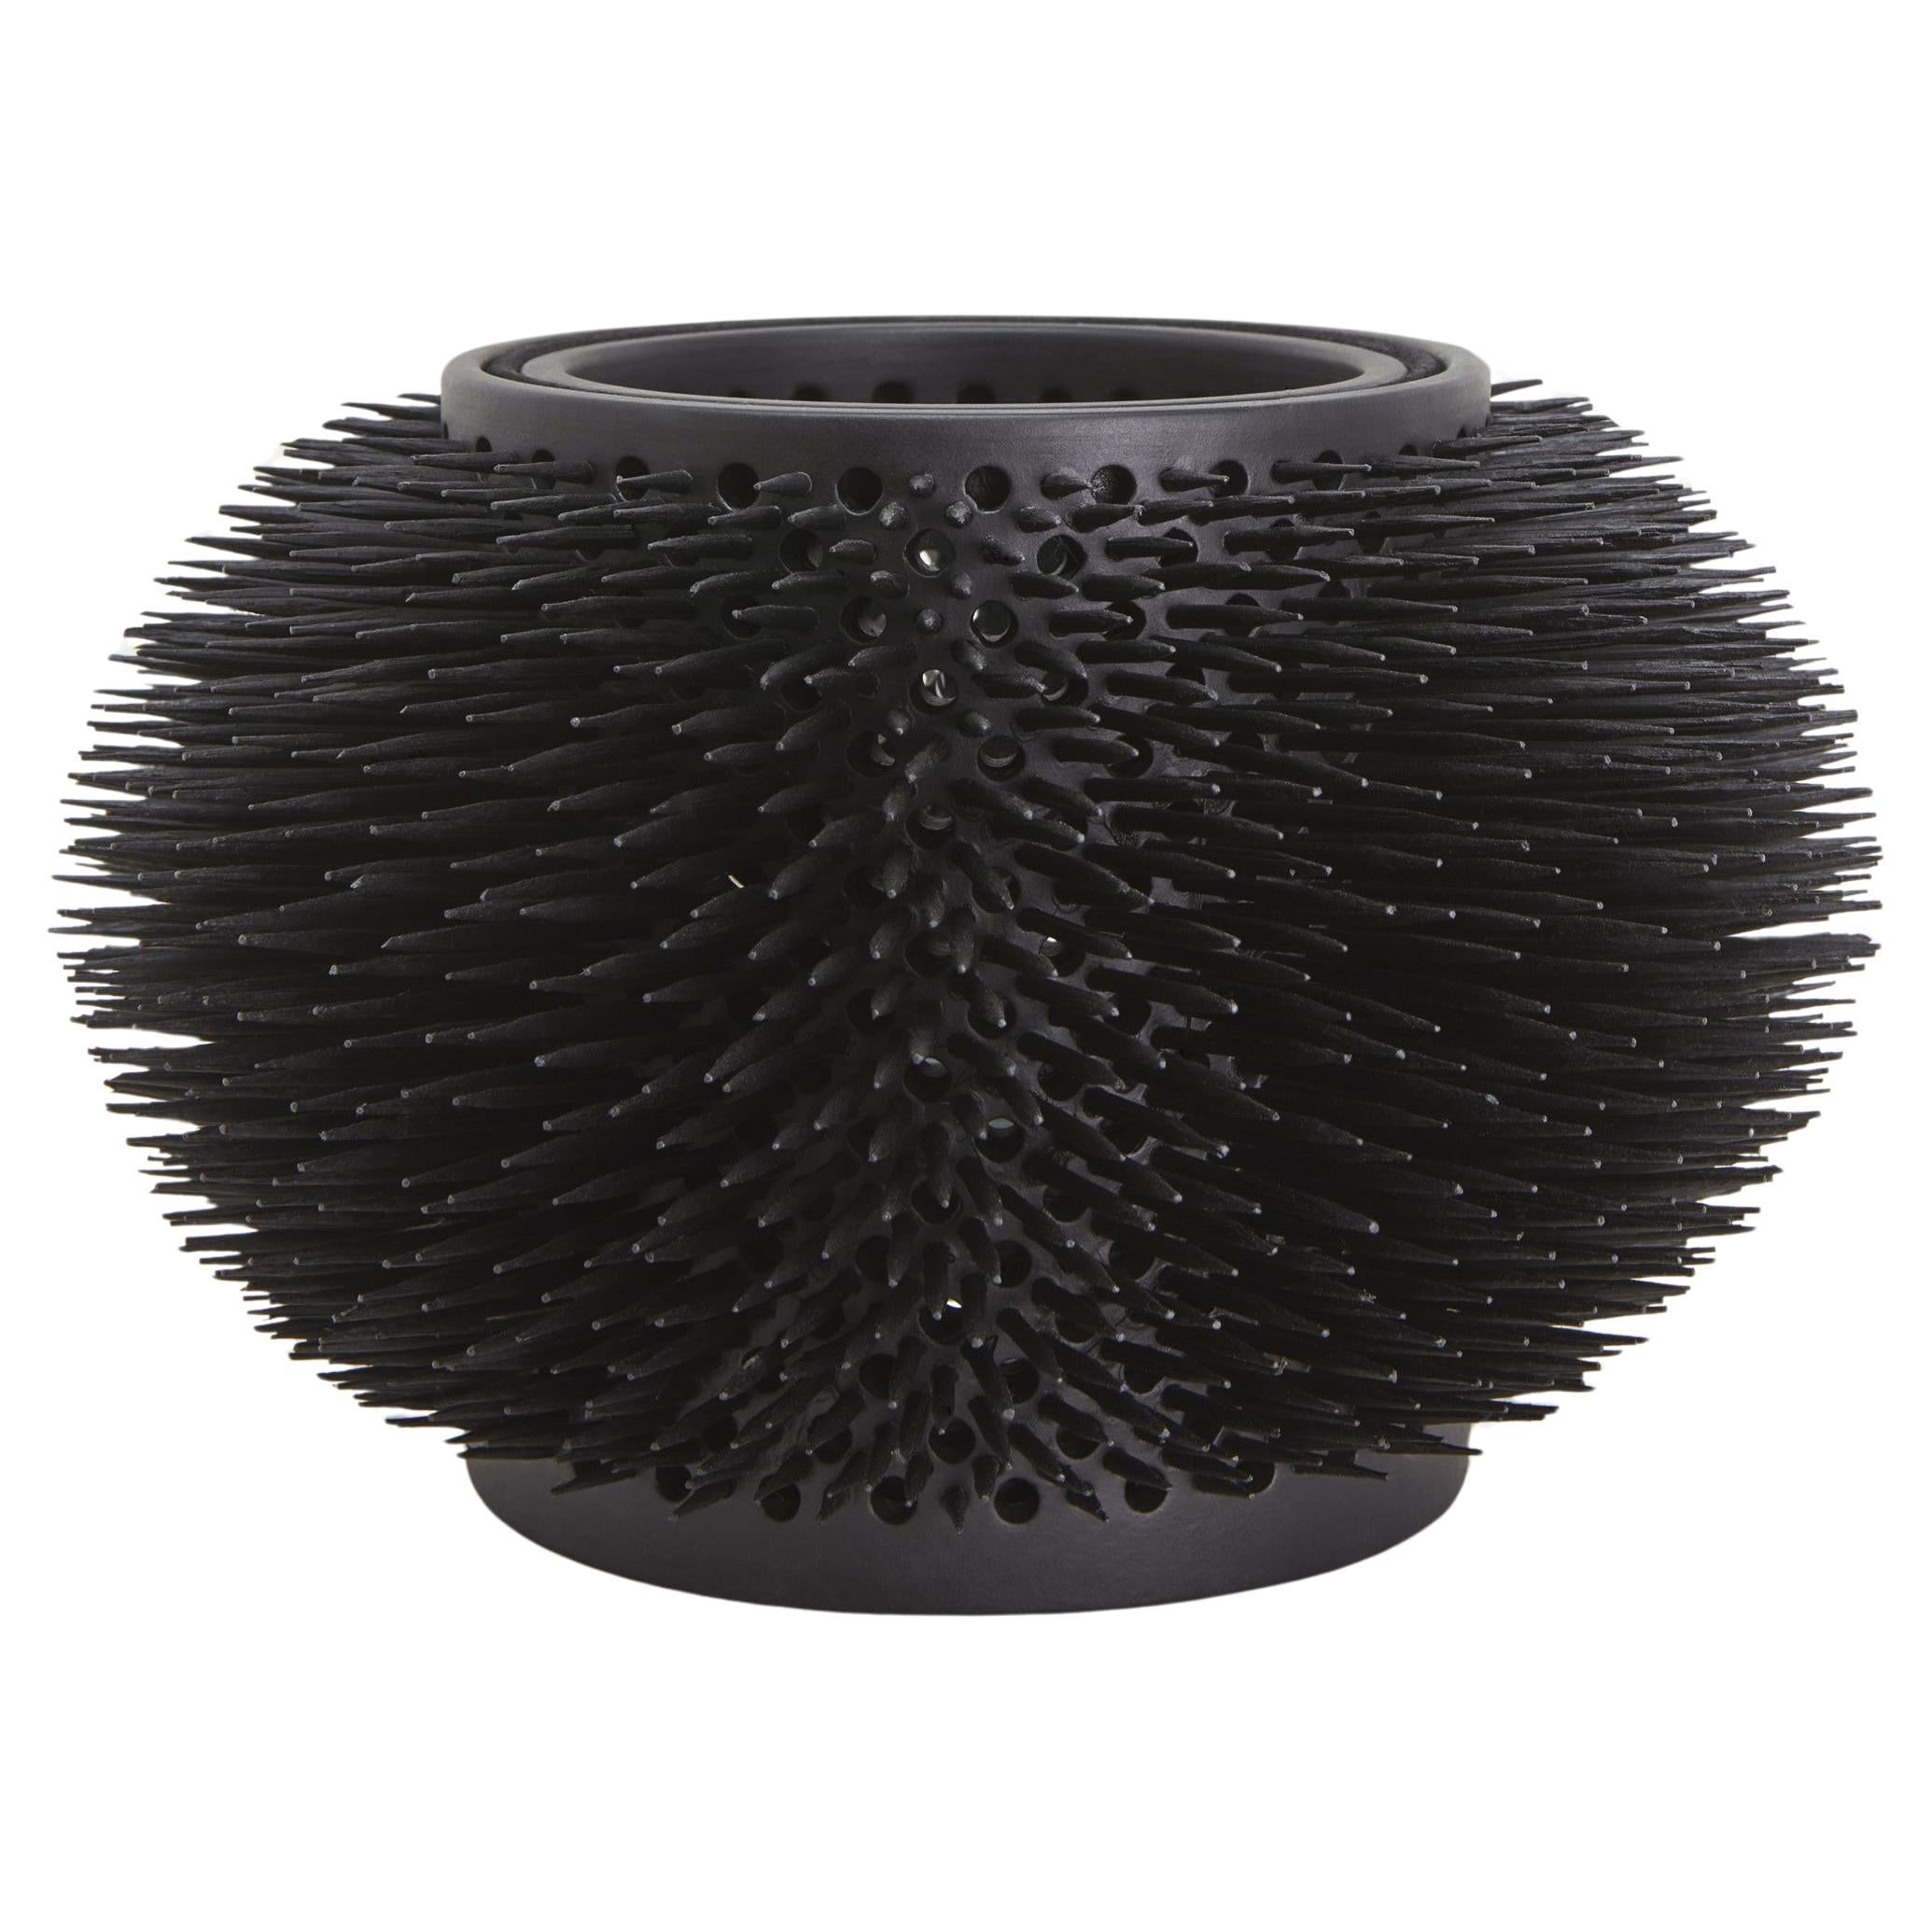 "Urchin" Earthenware and Wood Candle Votive by Gilles Caffier